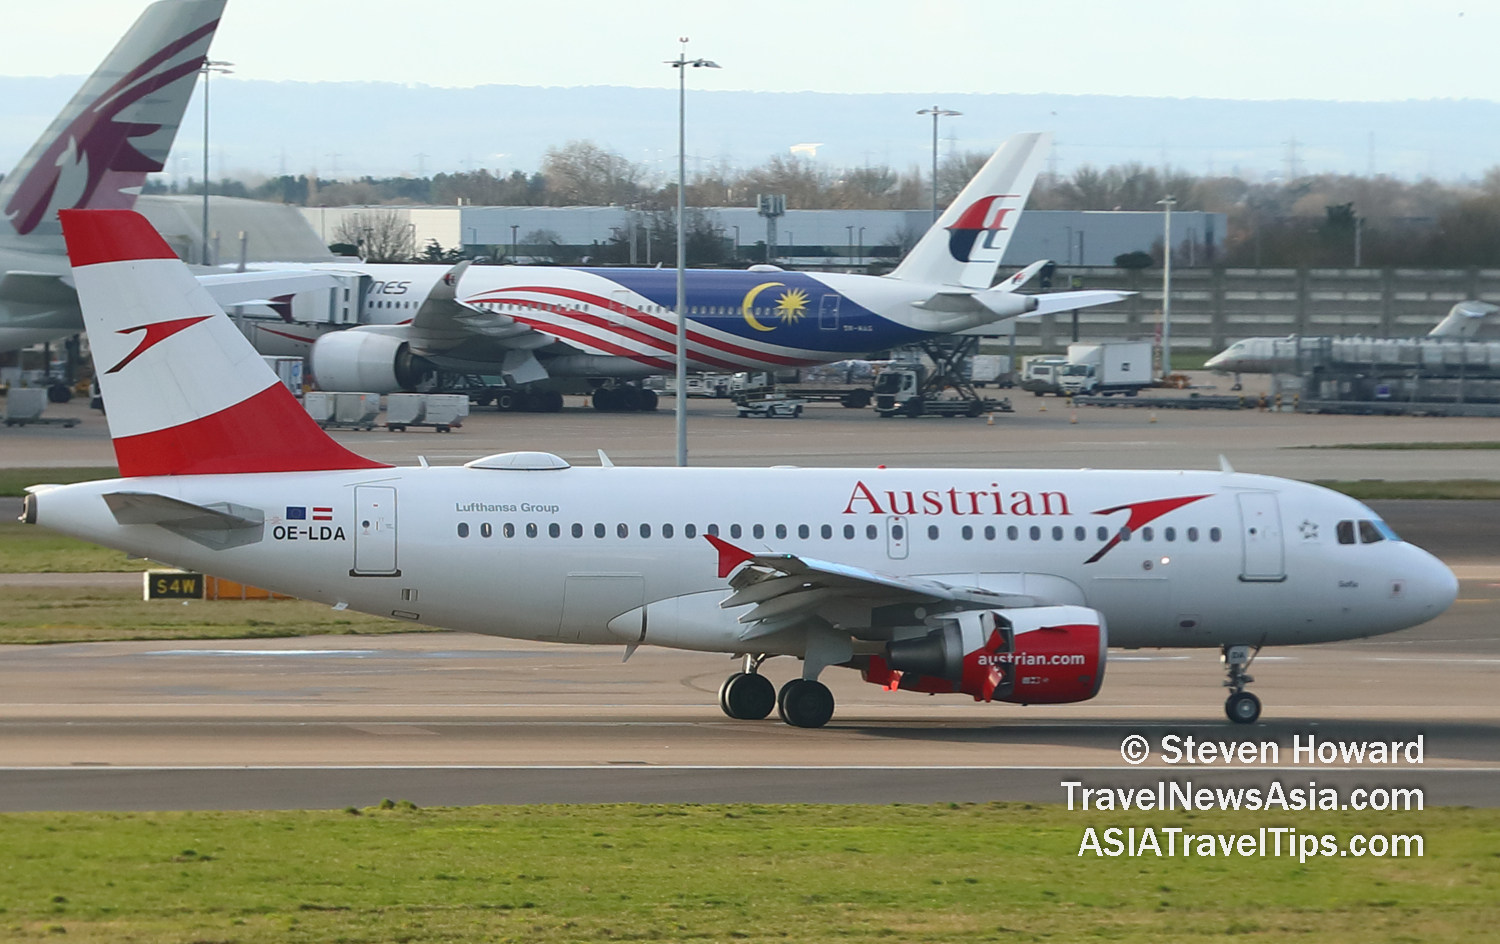 Austrian Airlines A319 reg: OE-LDA. Picture by Steven Howard of TravelNewsAsia.com Click to enlarge.